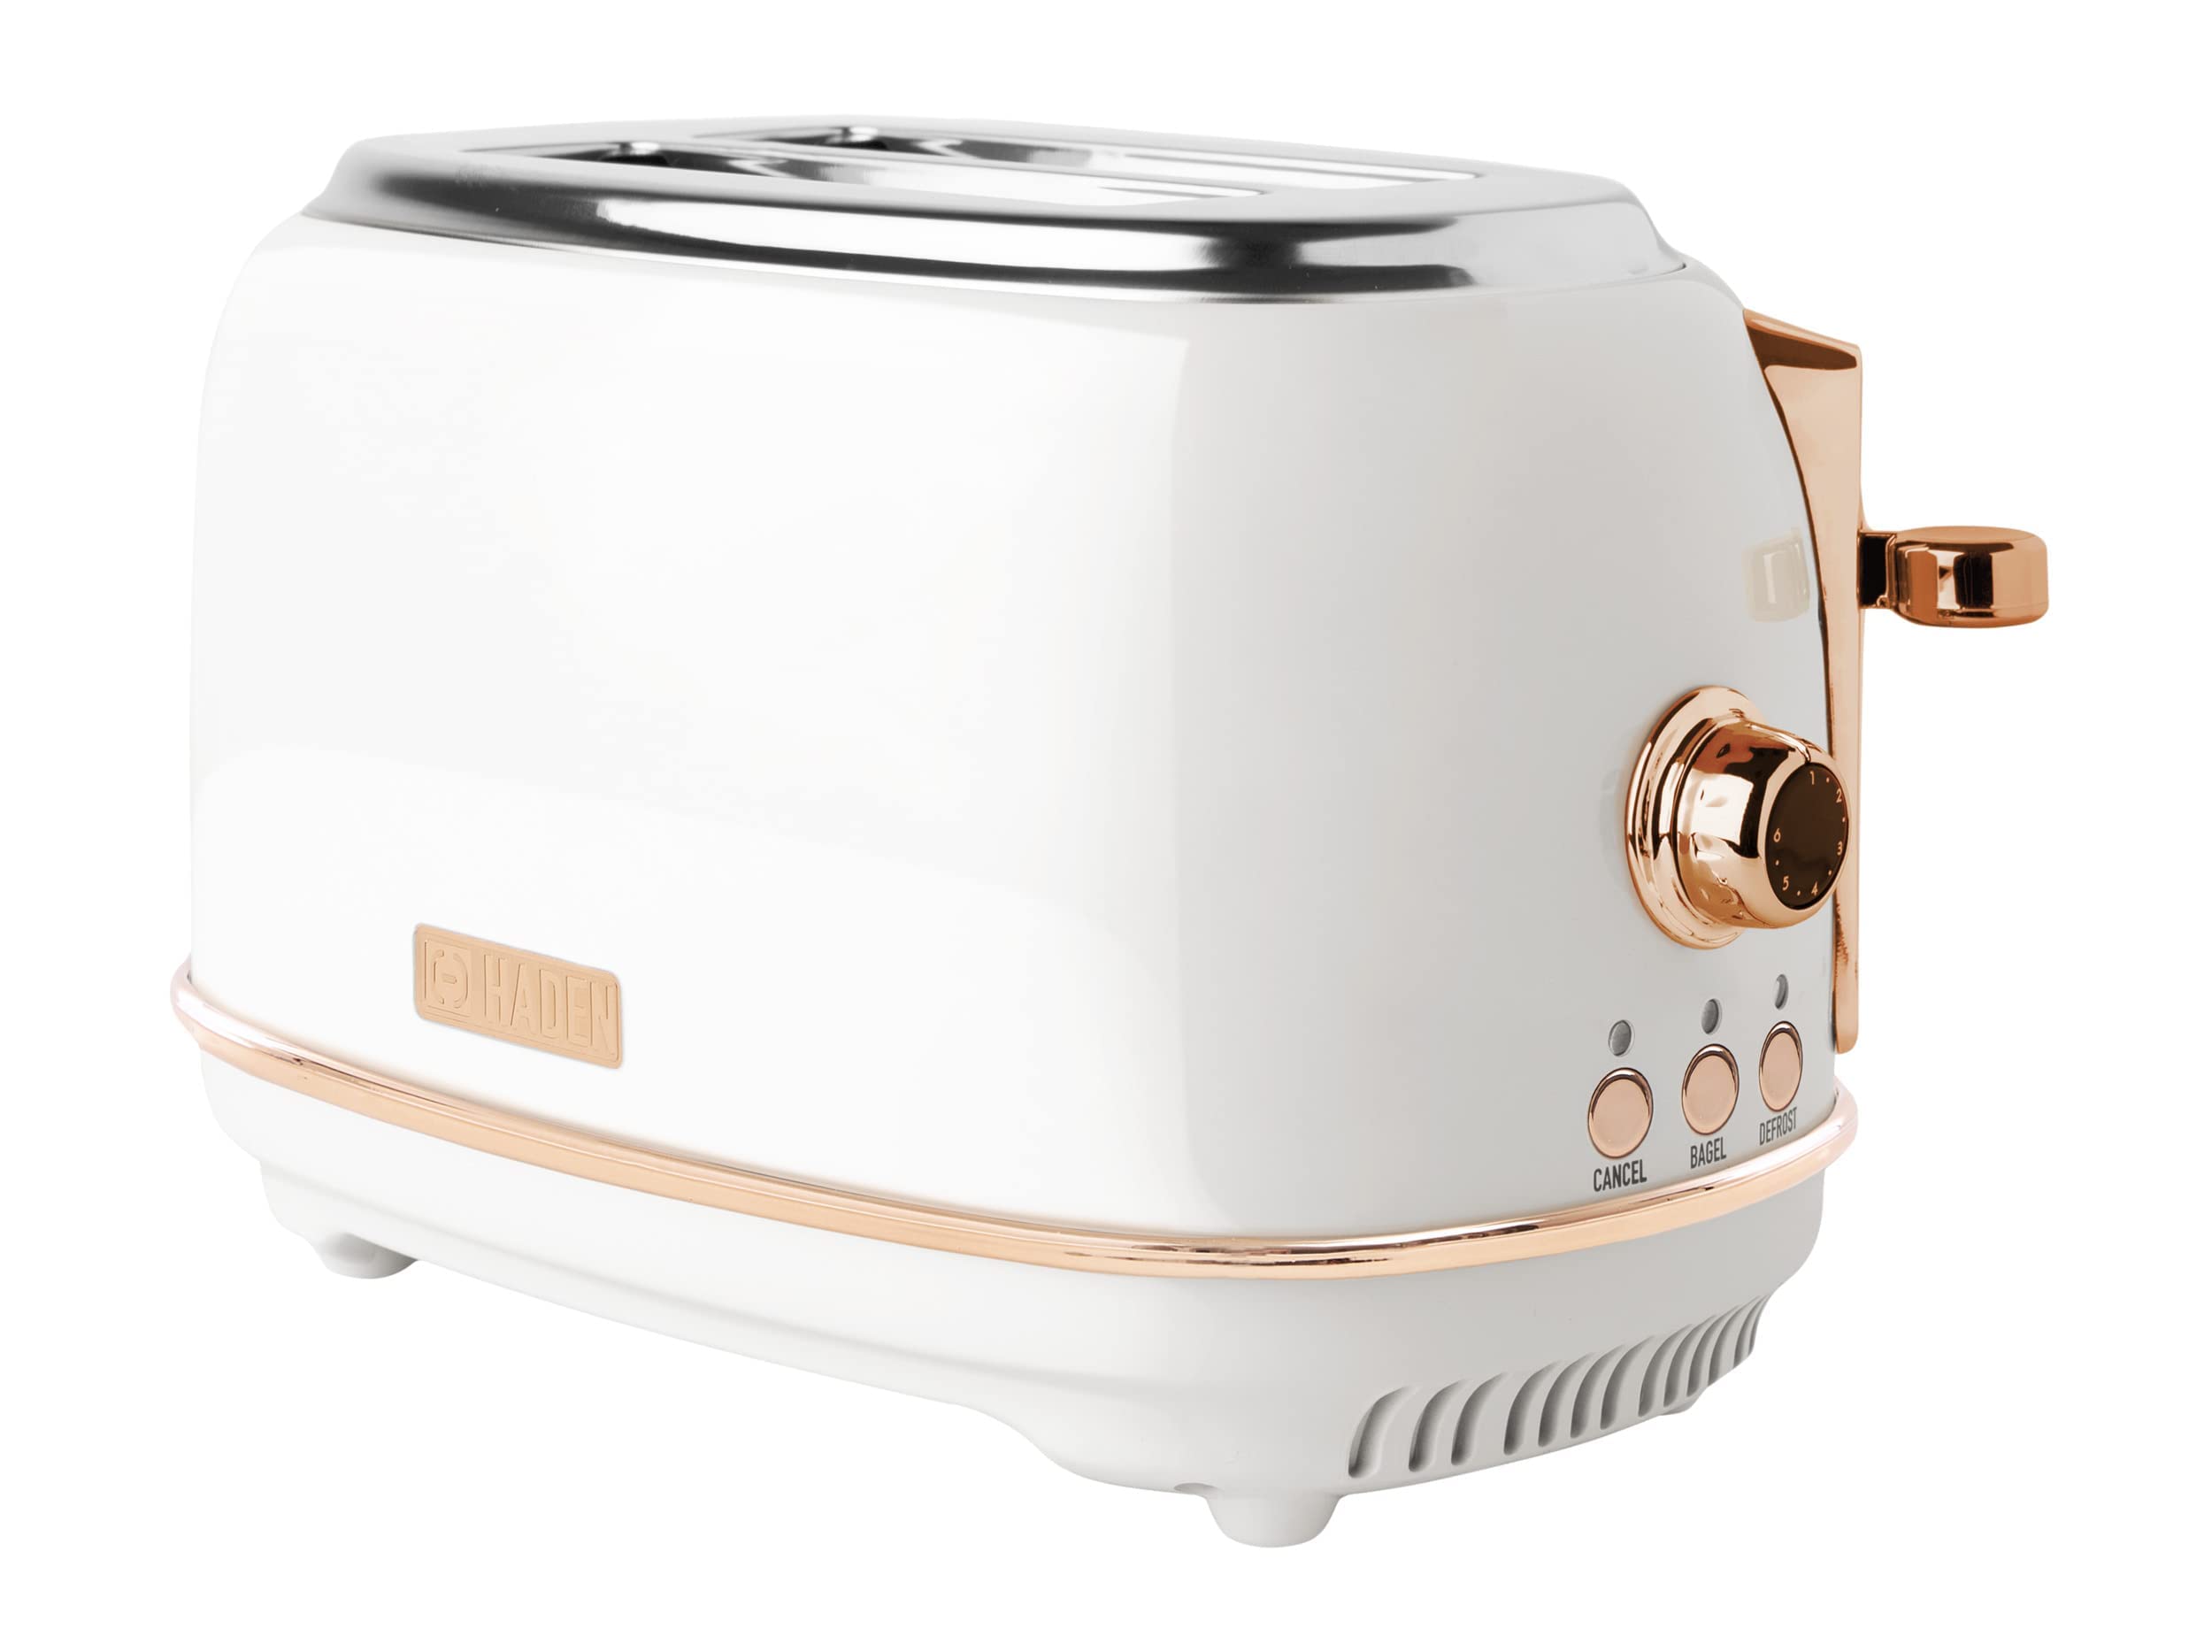 Haden Heritage Stainless Steel 2-Slice Toaster - Ivory / Copper